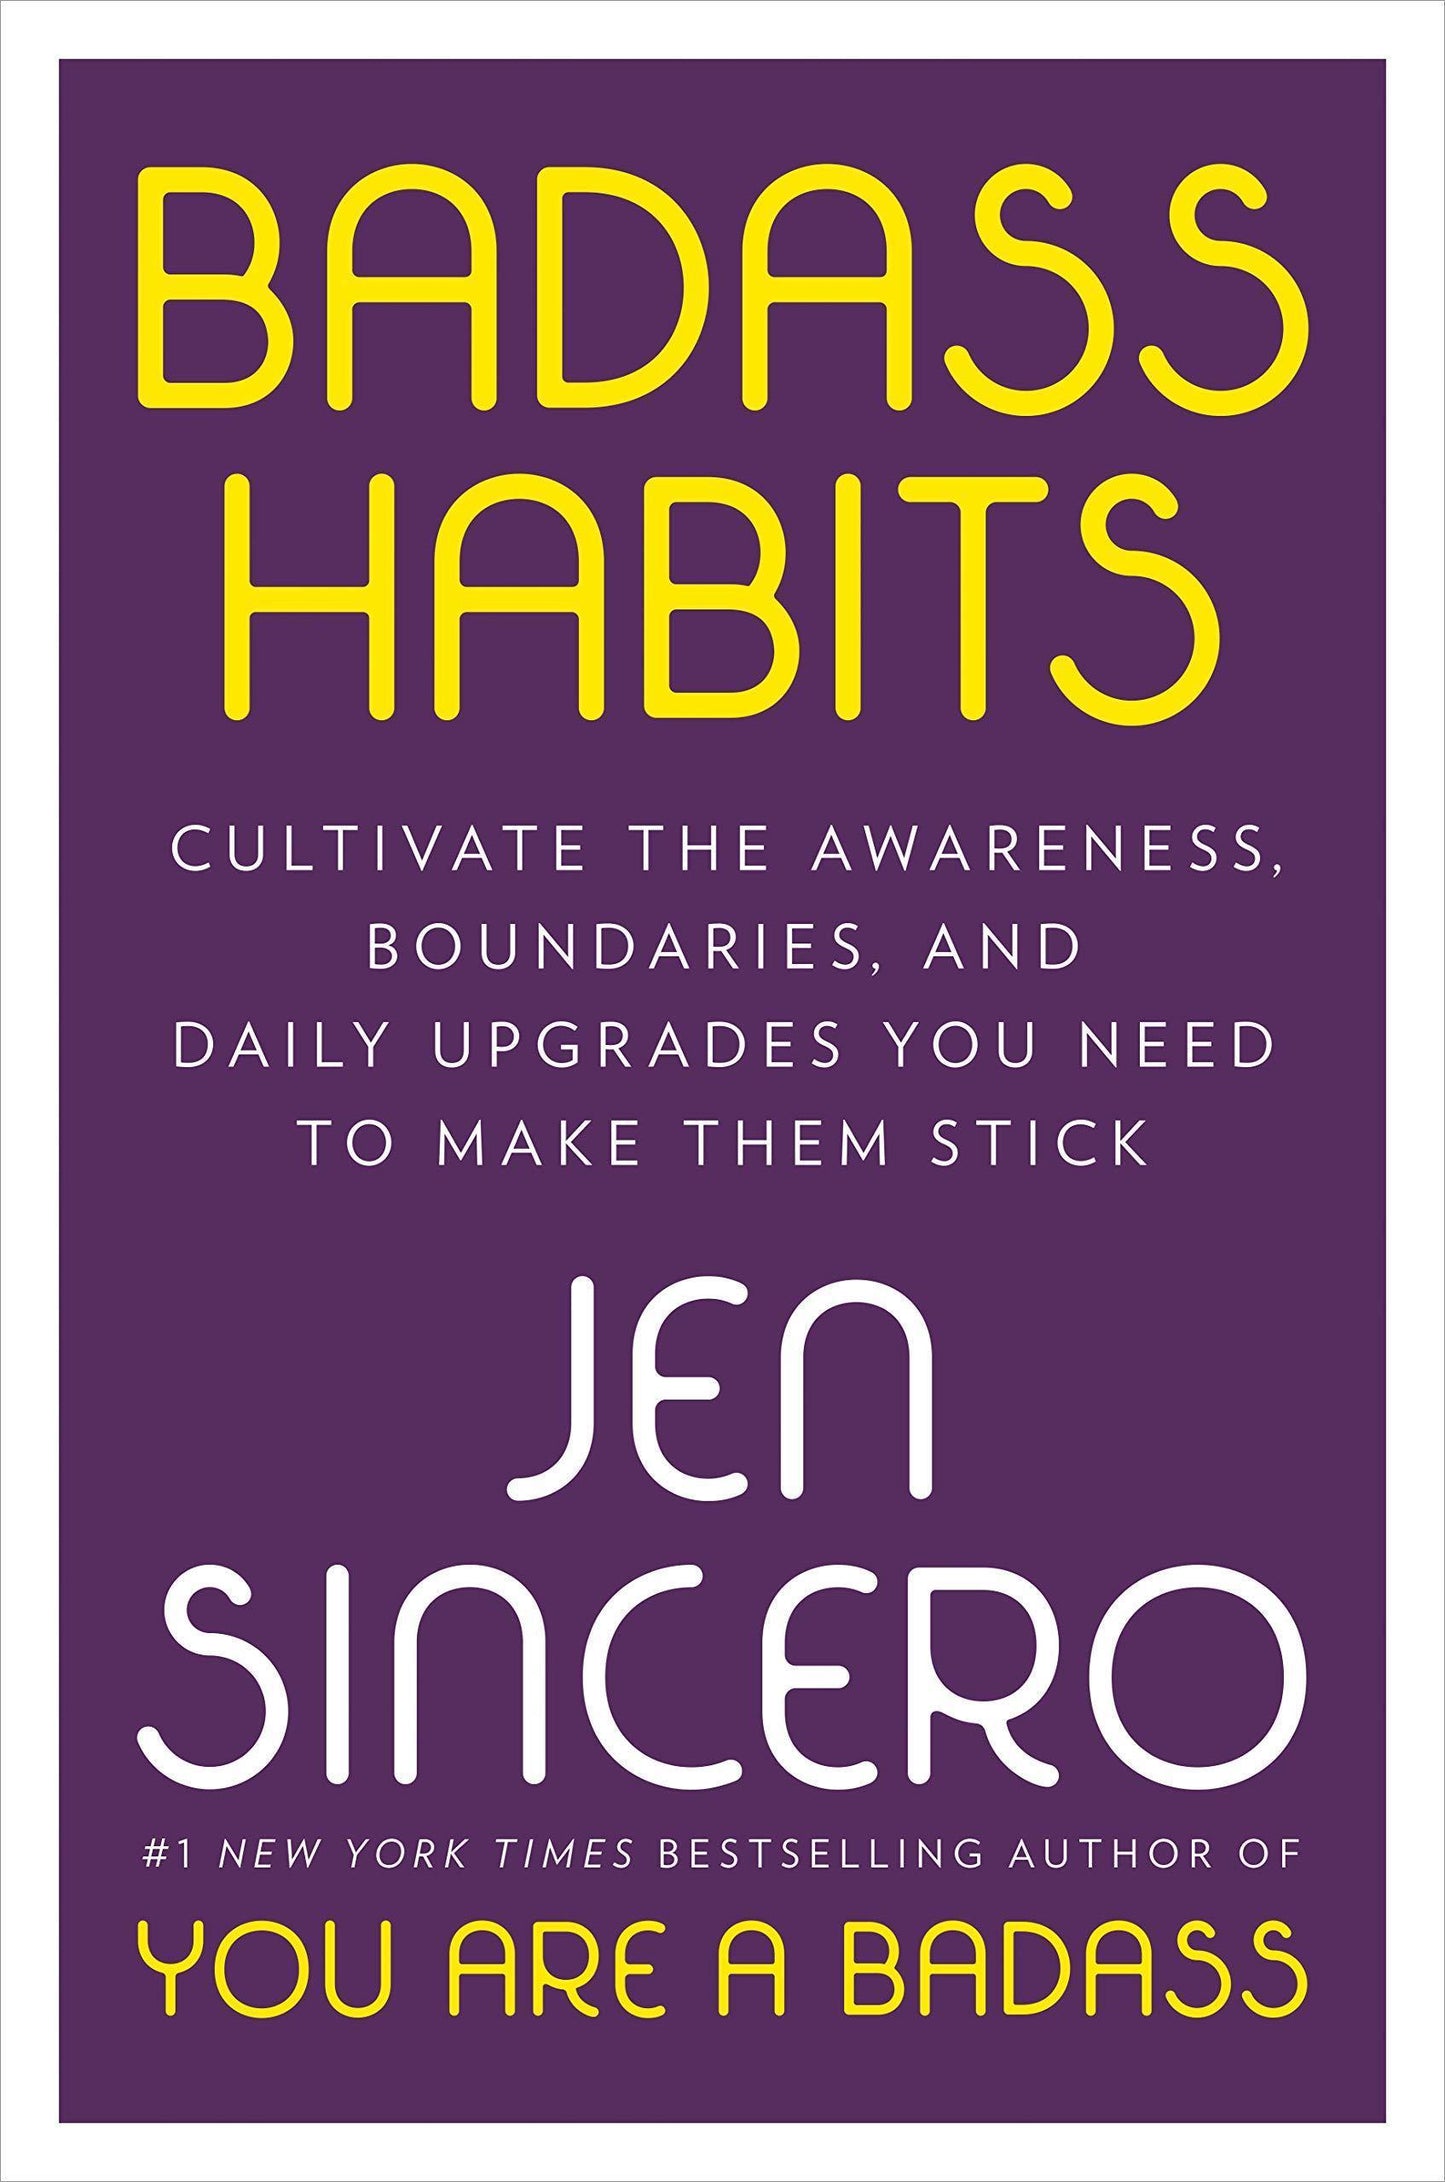 Badass Habits: Cultivate the Awareness, Boundaries, and Daily Upgrades You Need to Make Them Stick by Jen Sincero - Book A Book